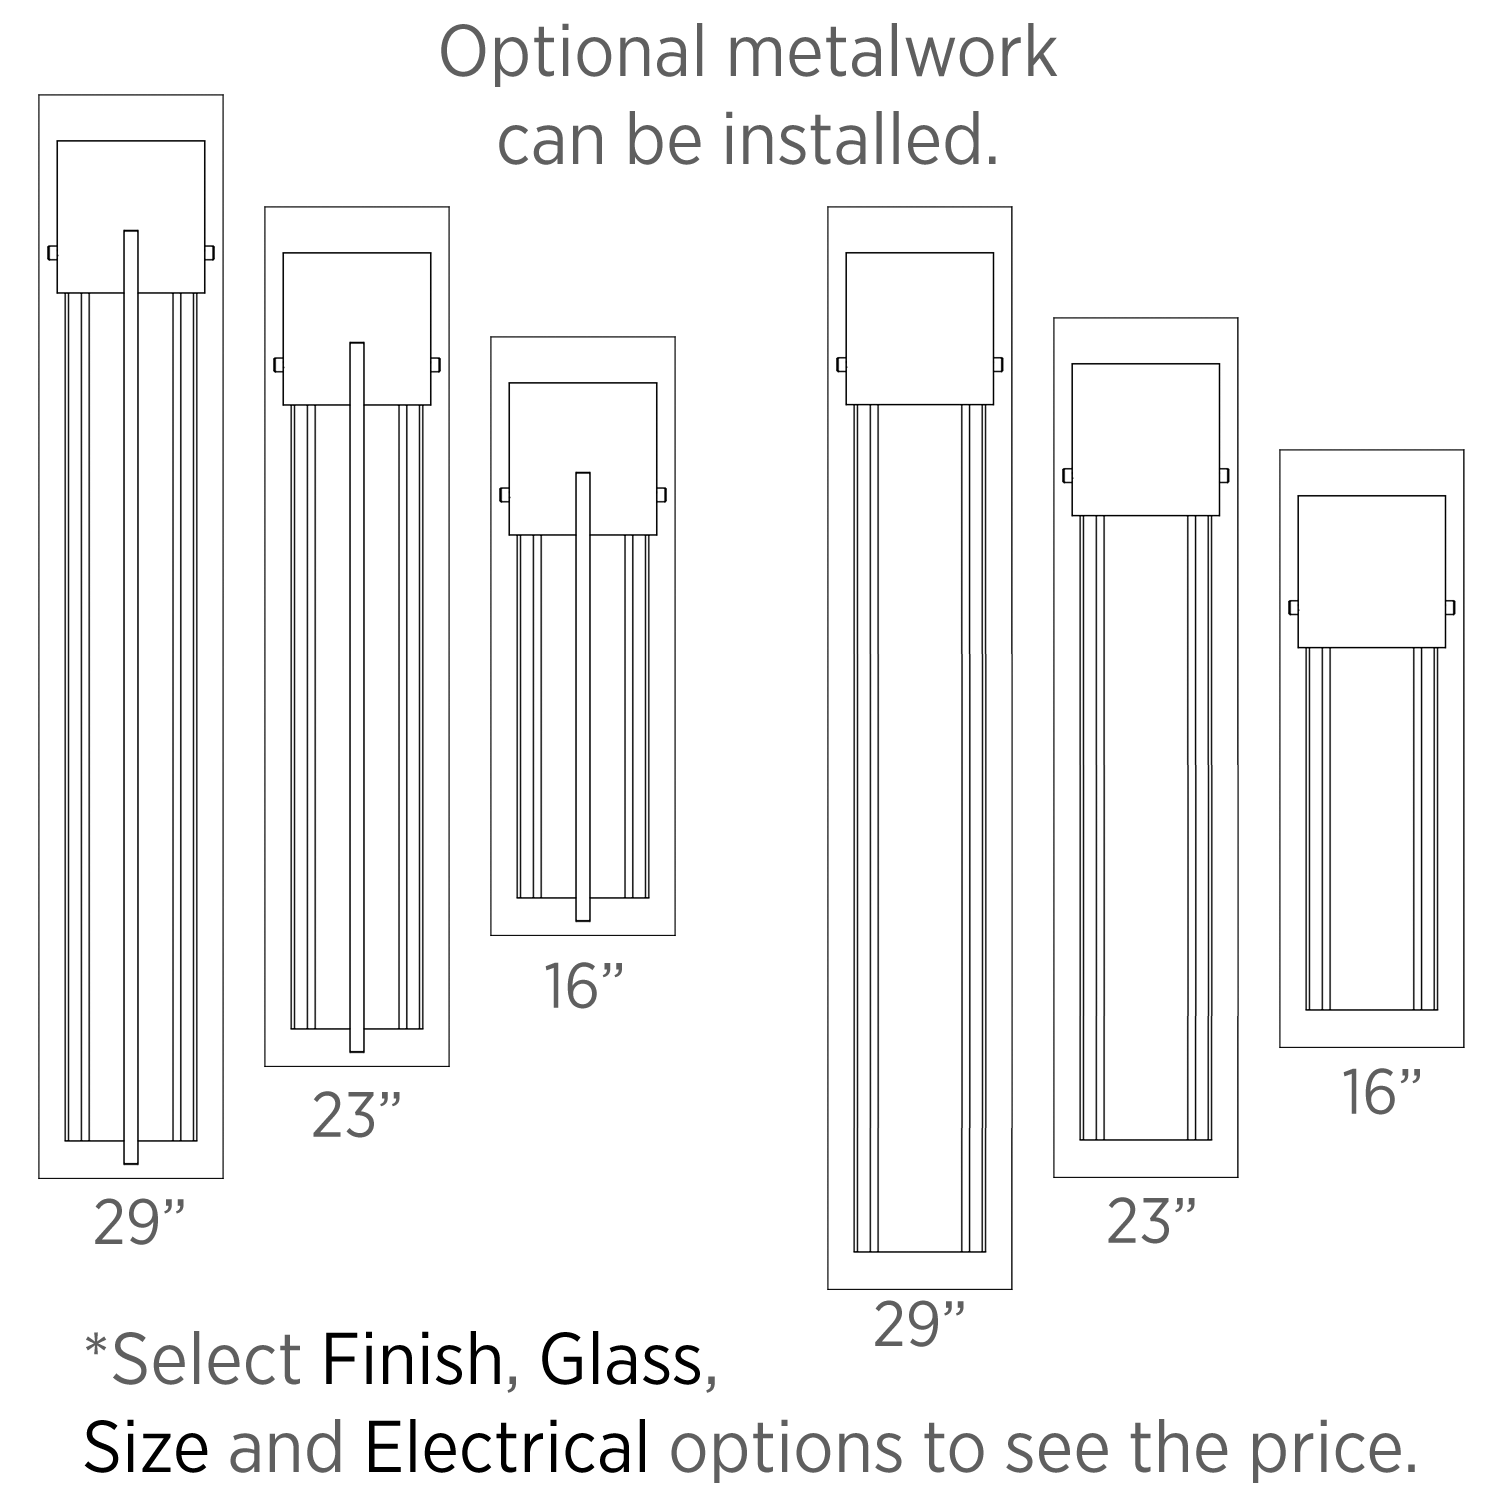 Outdoor Half Square Sconce ODB0055-SS size and metalwork explanation